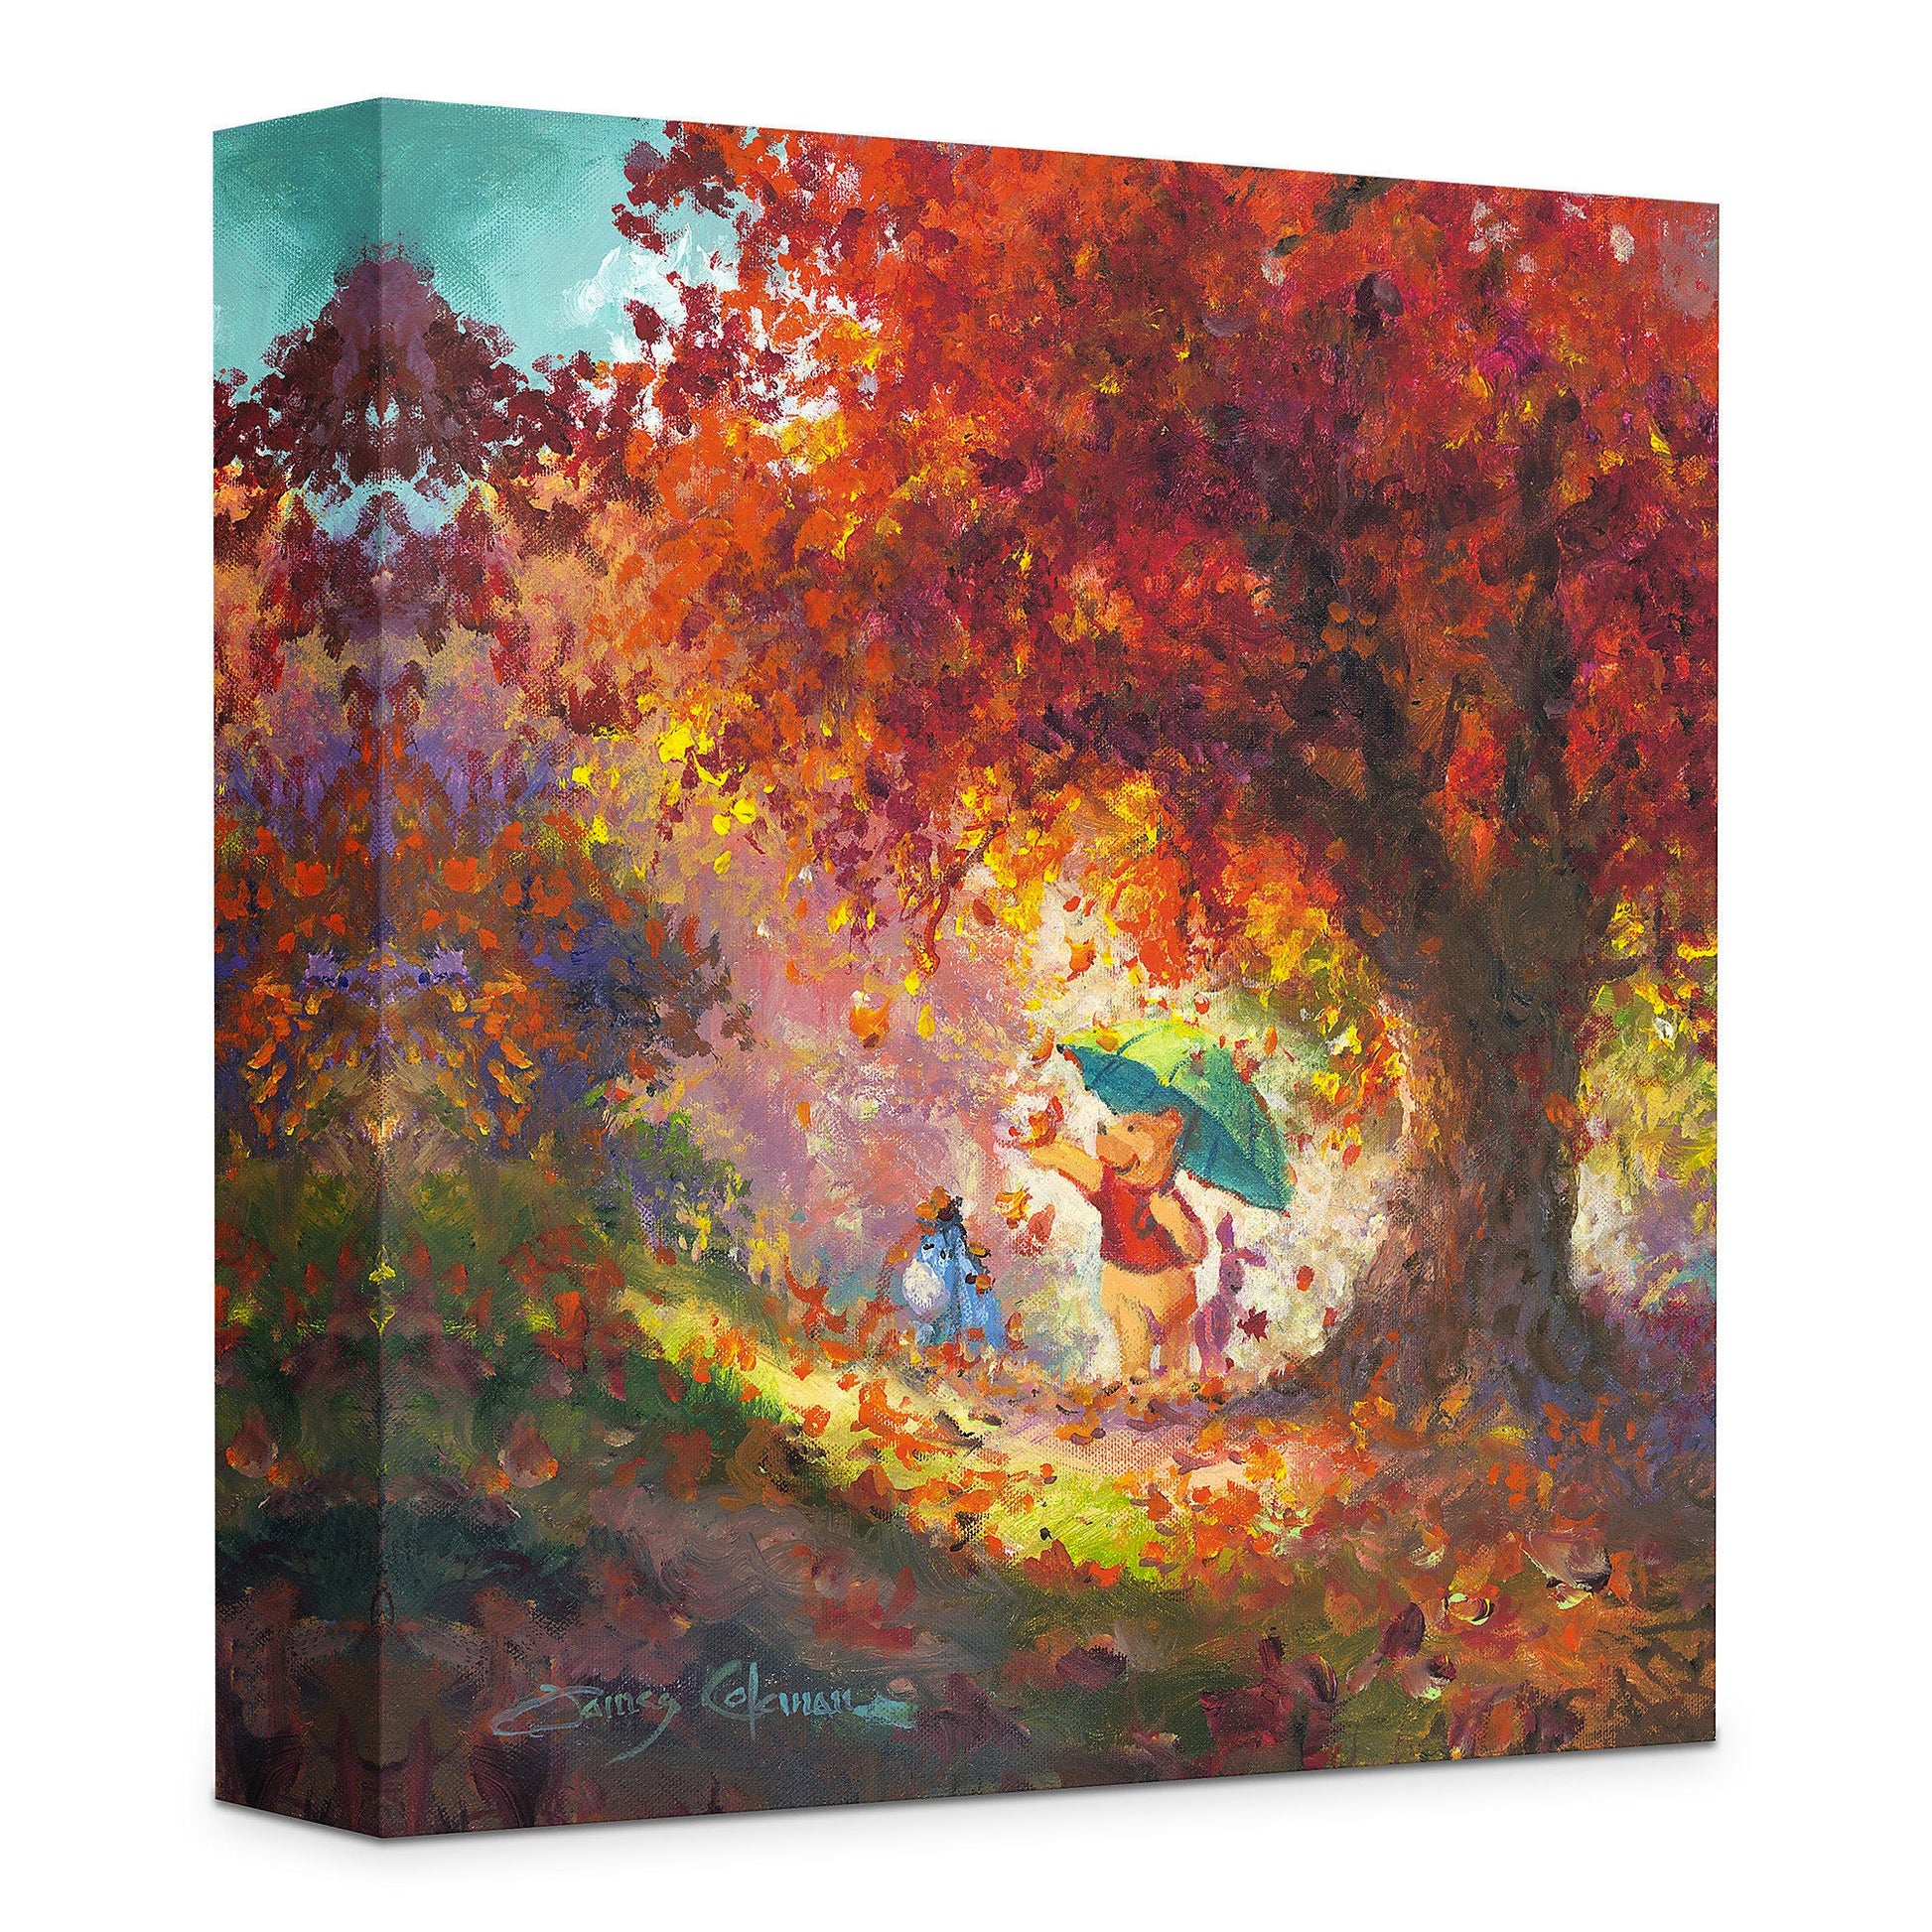 James Coleman Disney "Autumn Leaves Gently Falling" Limited Edition Canvas Giclee